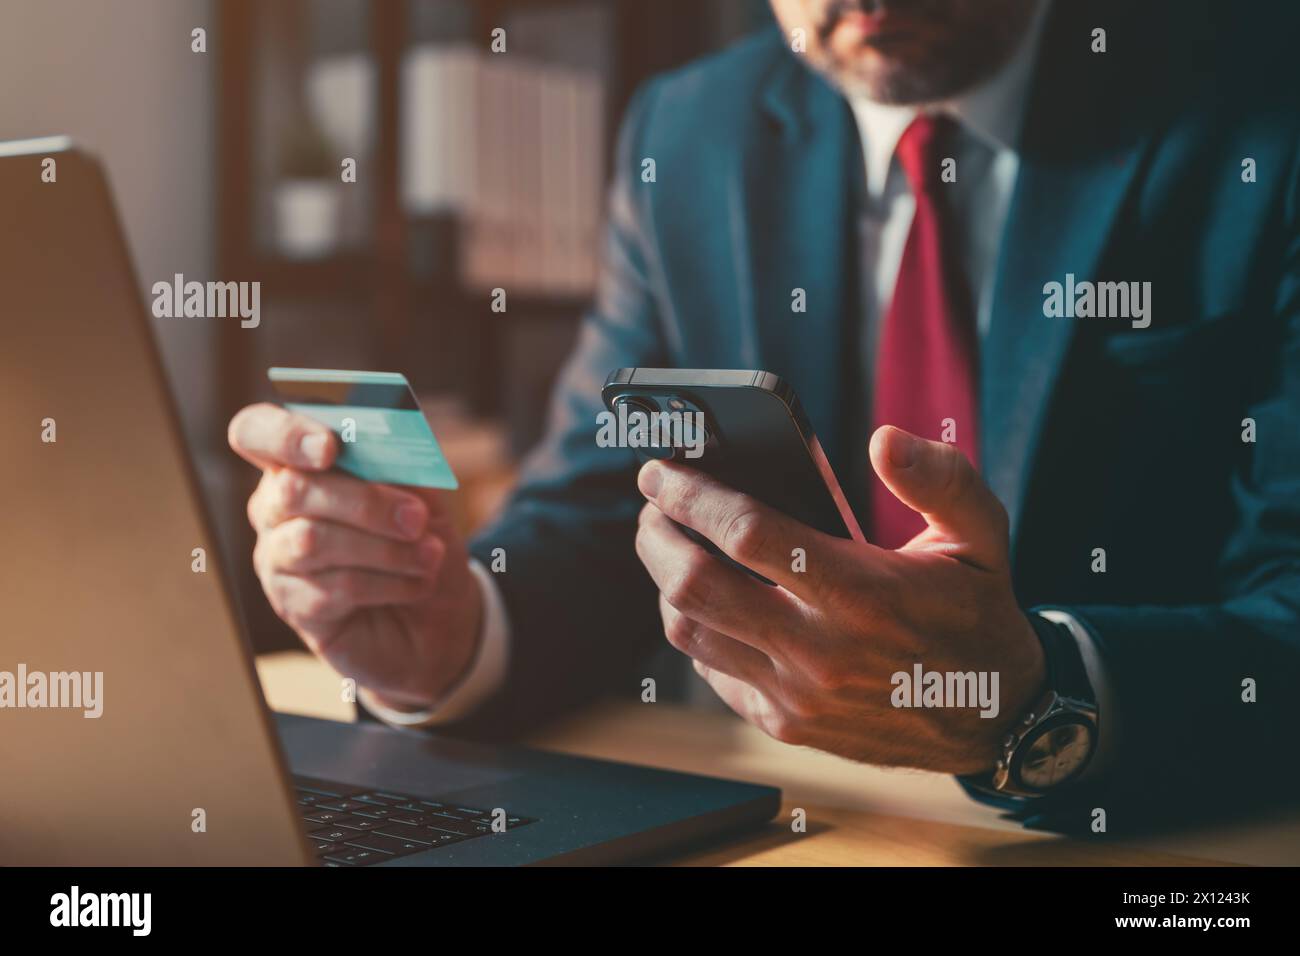 Entrepreneur using smartphone and credit card, electronic banking concept, selective focus Stock Photo